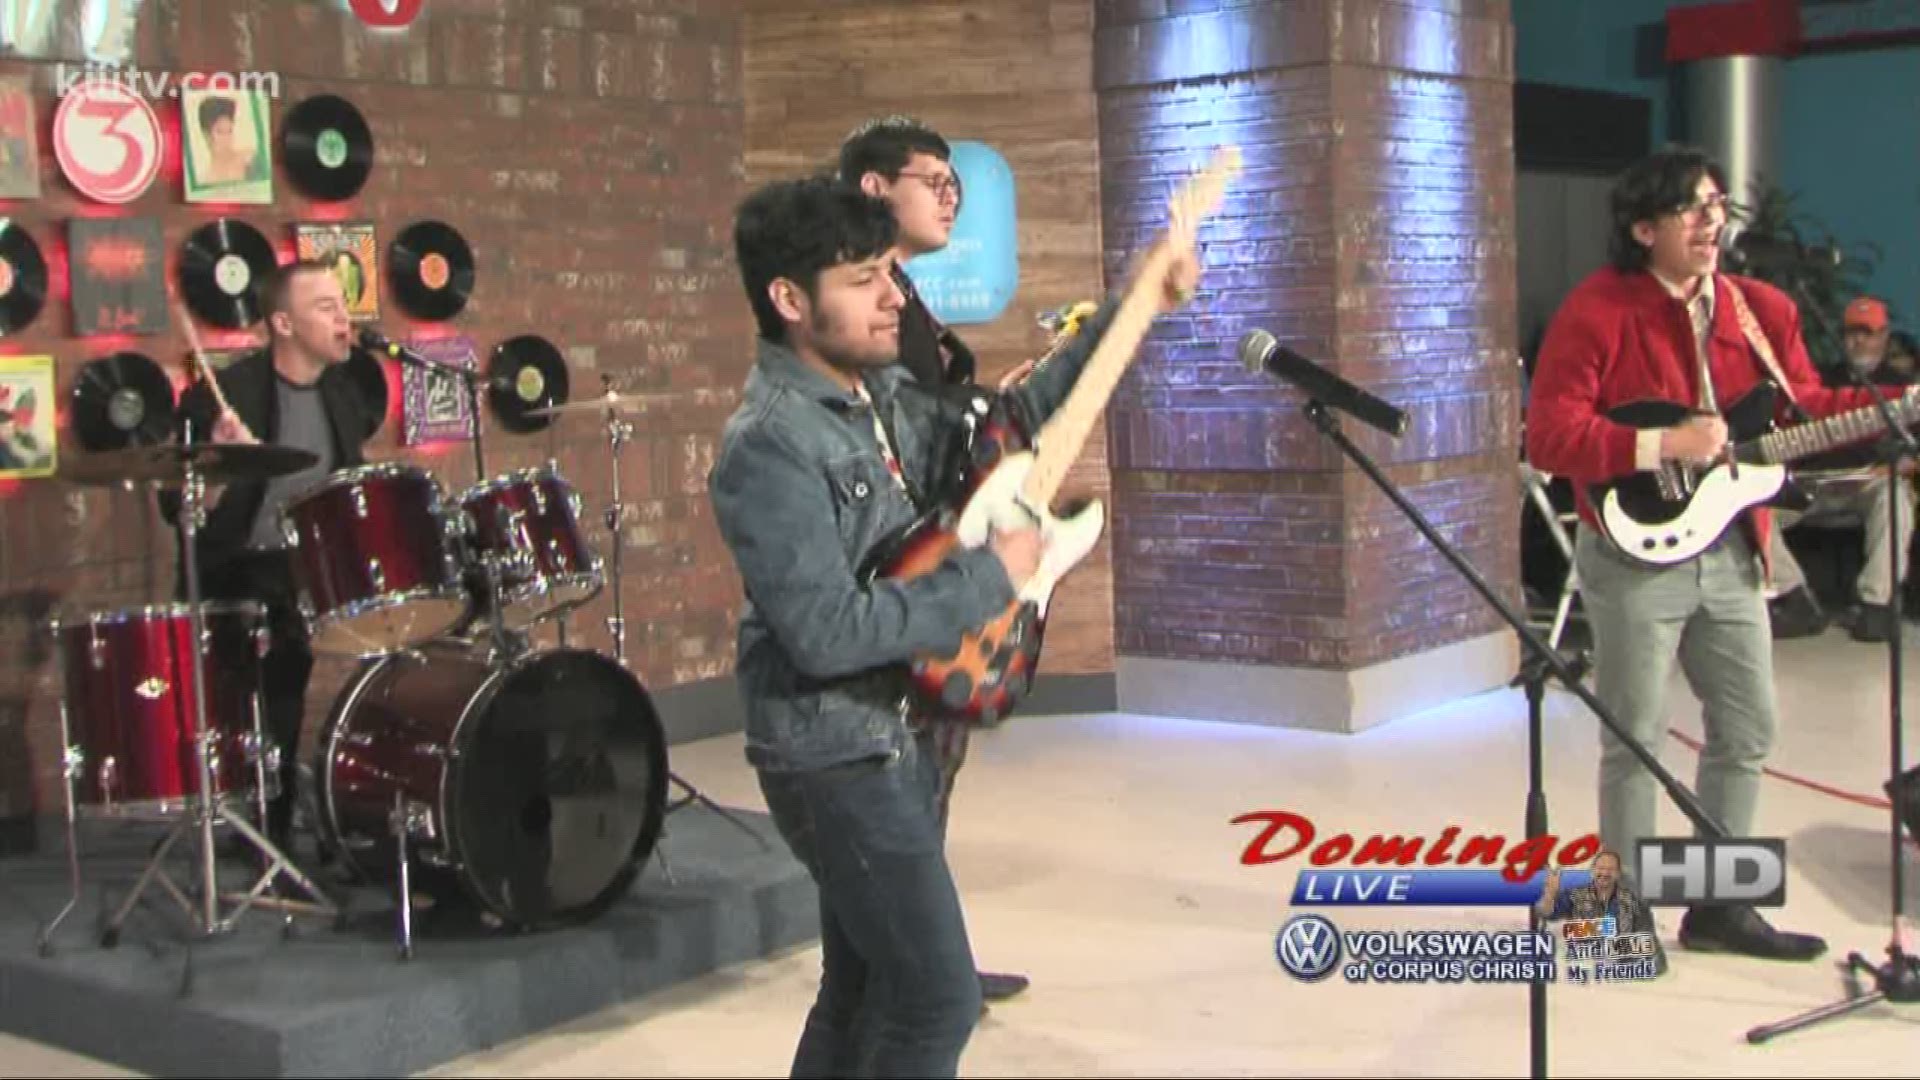 The Blind Owls performing "There Goes My Girl" on Domingo Live.